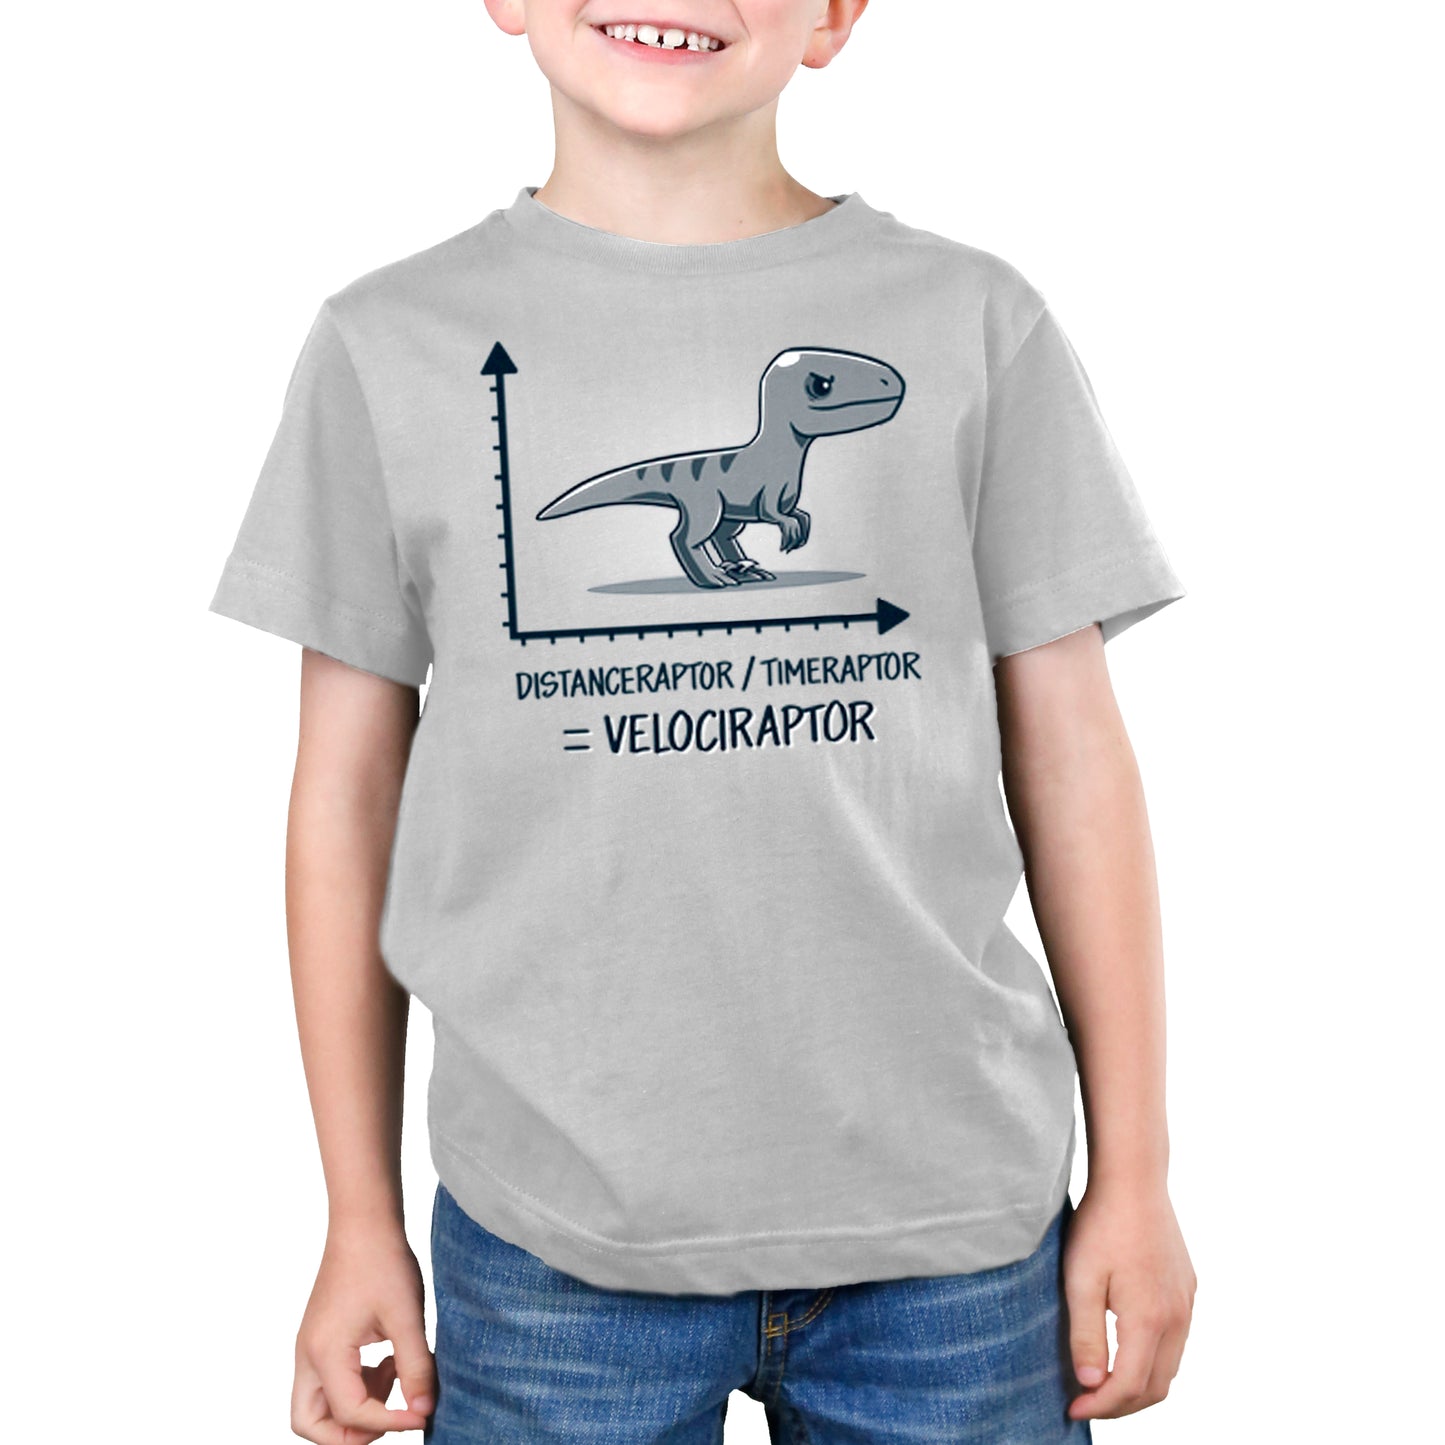 A young boy wearing a grey t-shirt with a Velociraptor design from TeeTurtle.